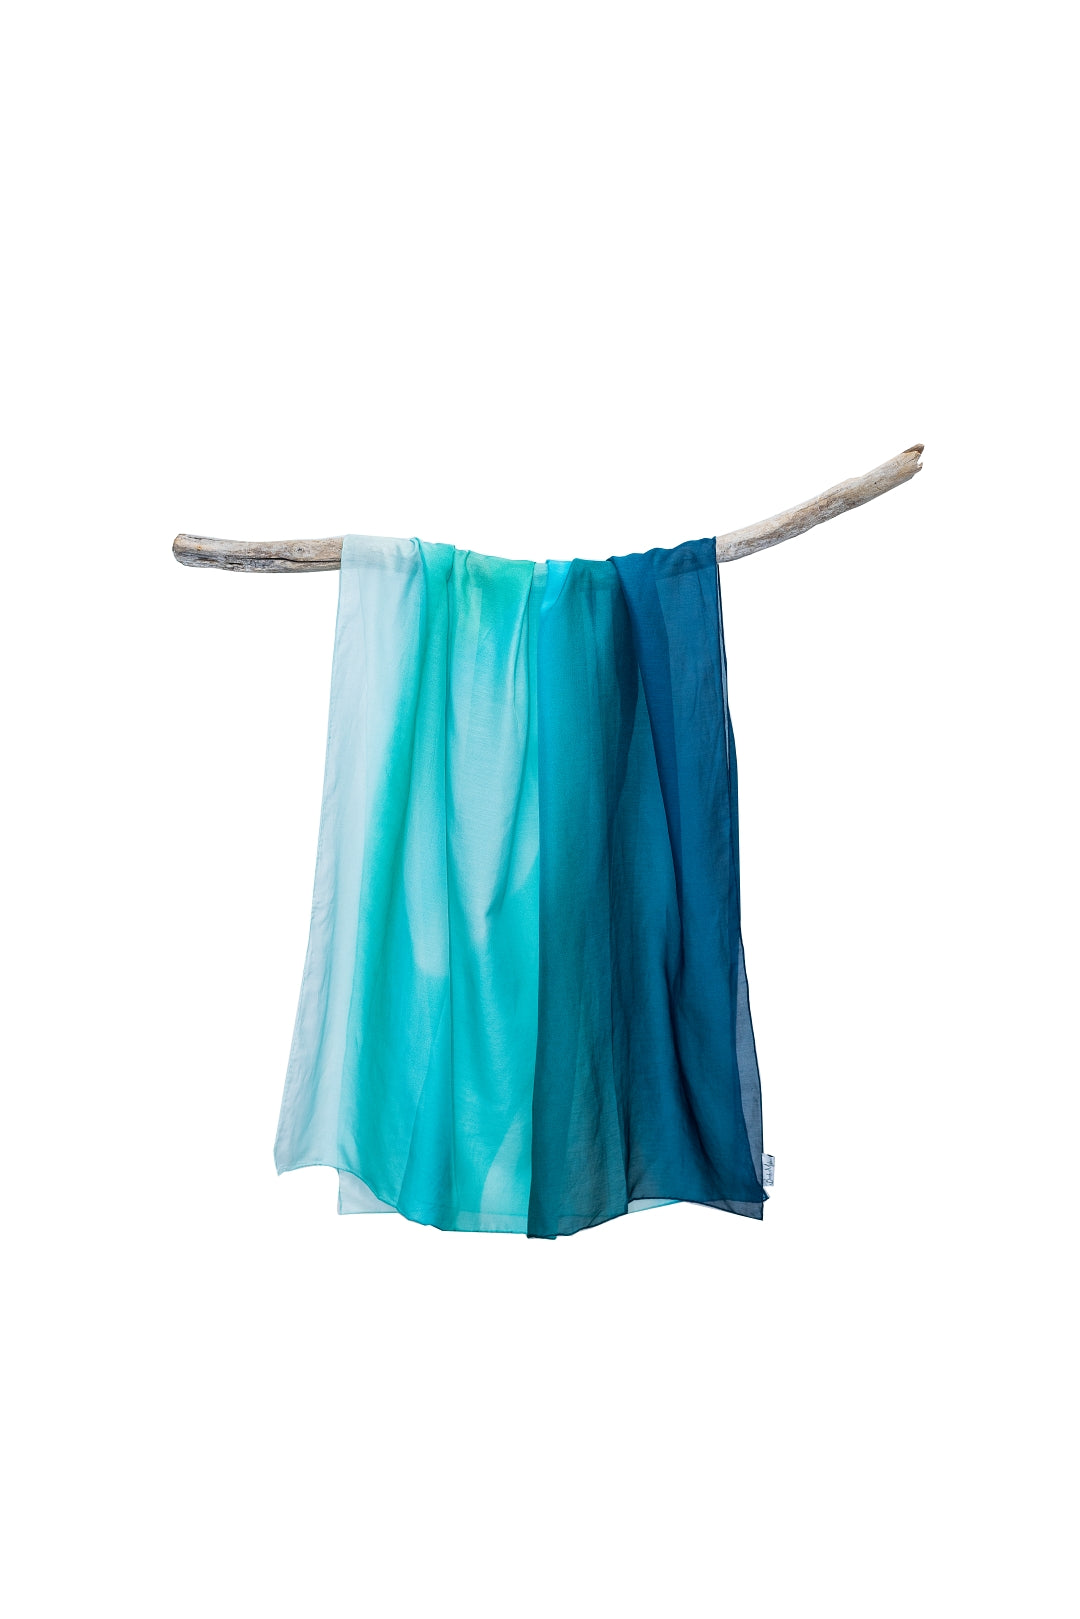 cotton silk sarong print of a small boat in the distance replicates a comet amongst the sand and blue green water swirling together